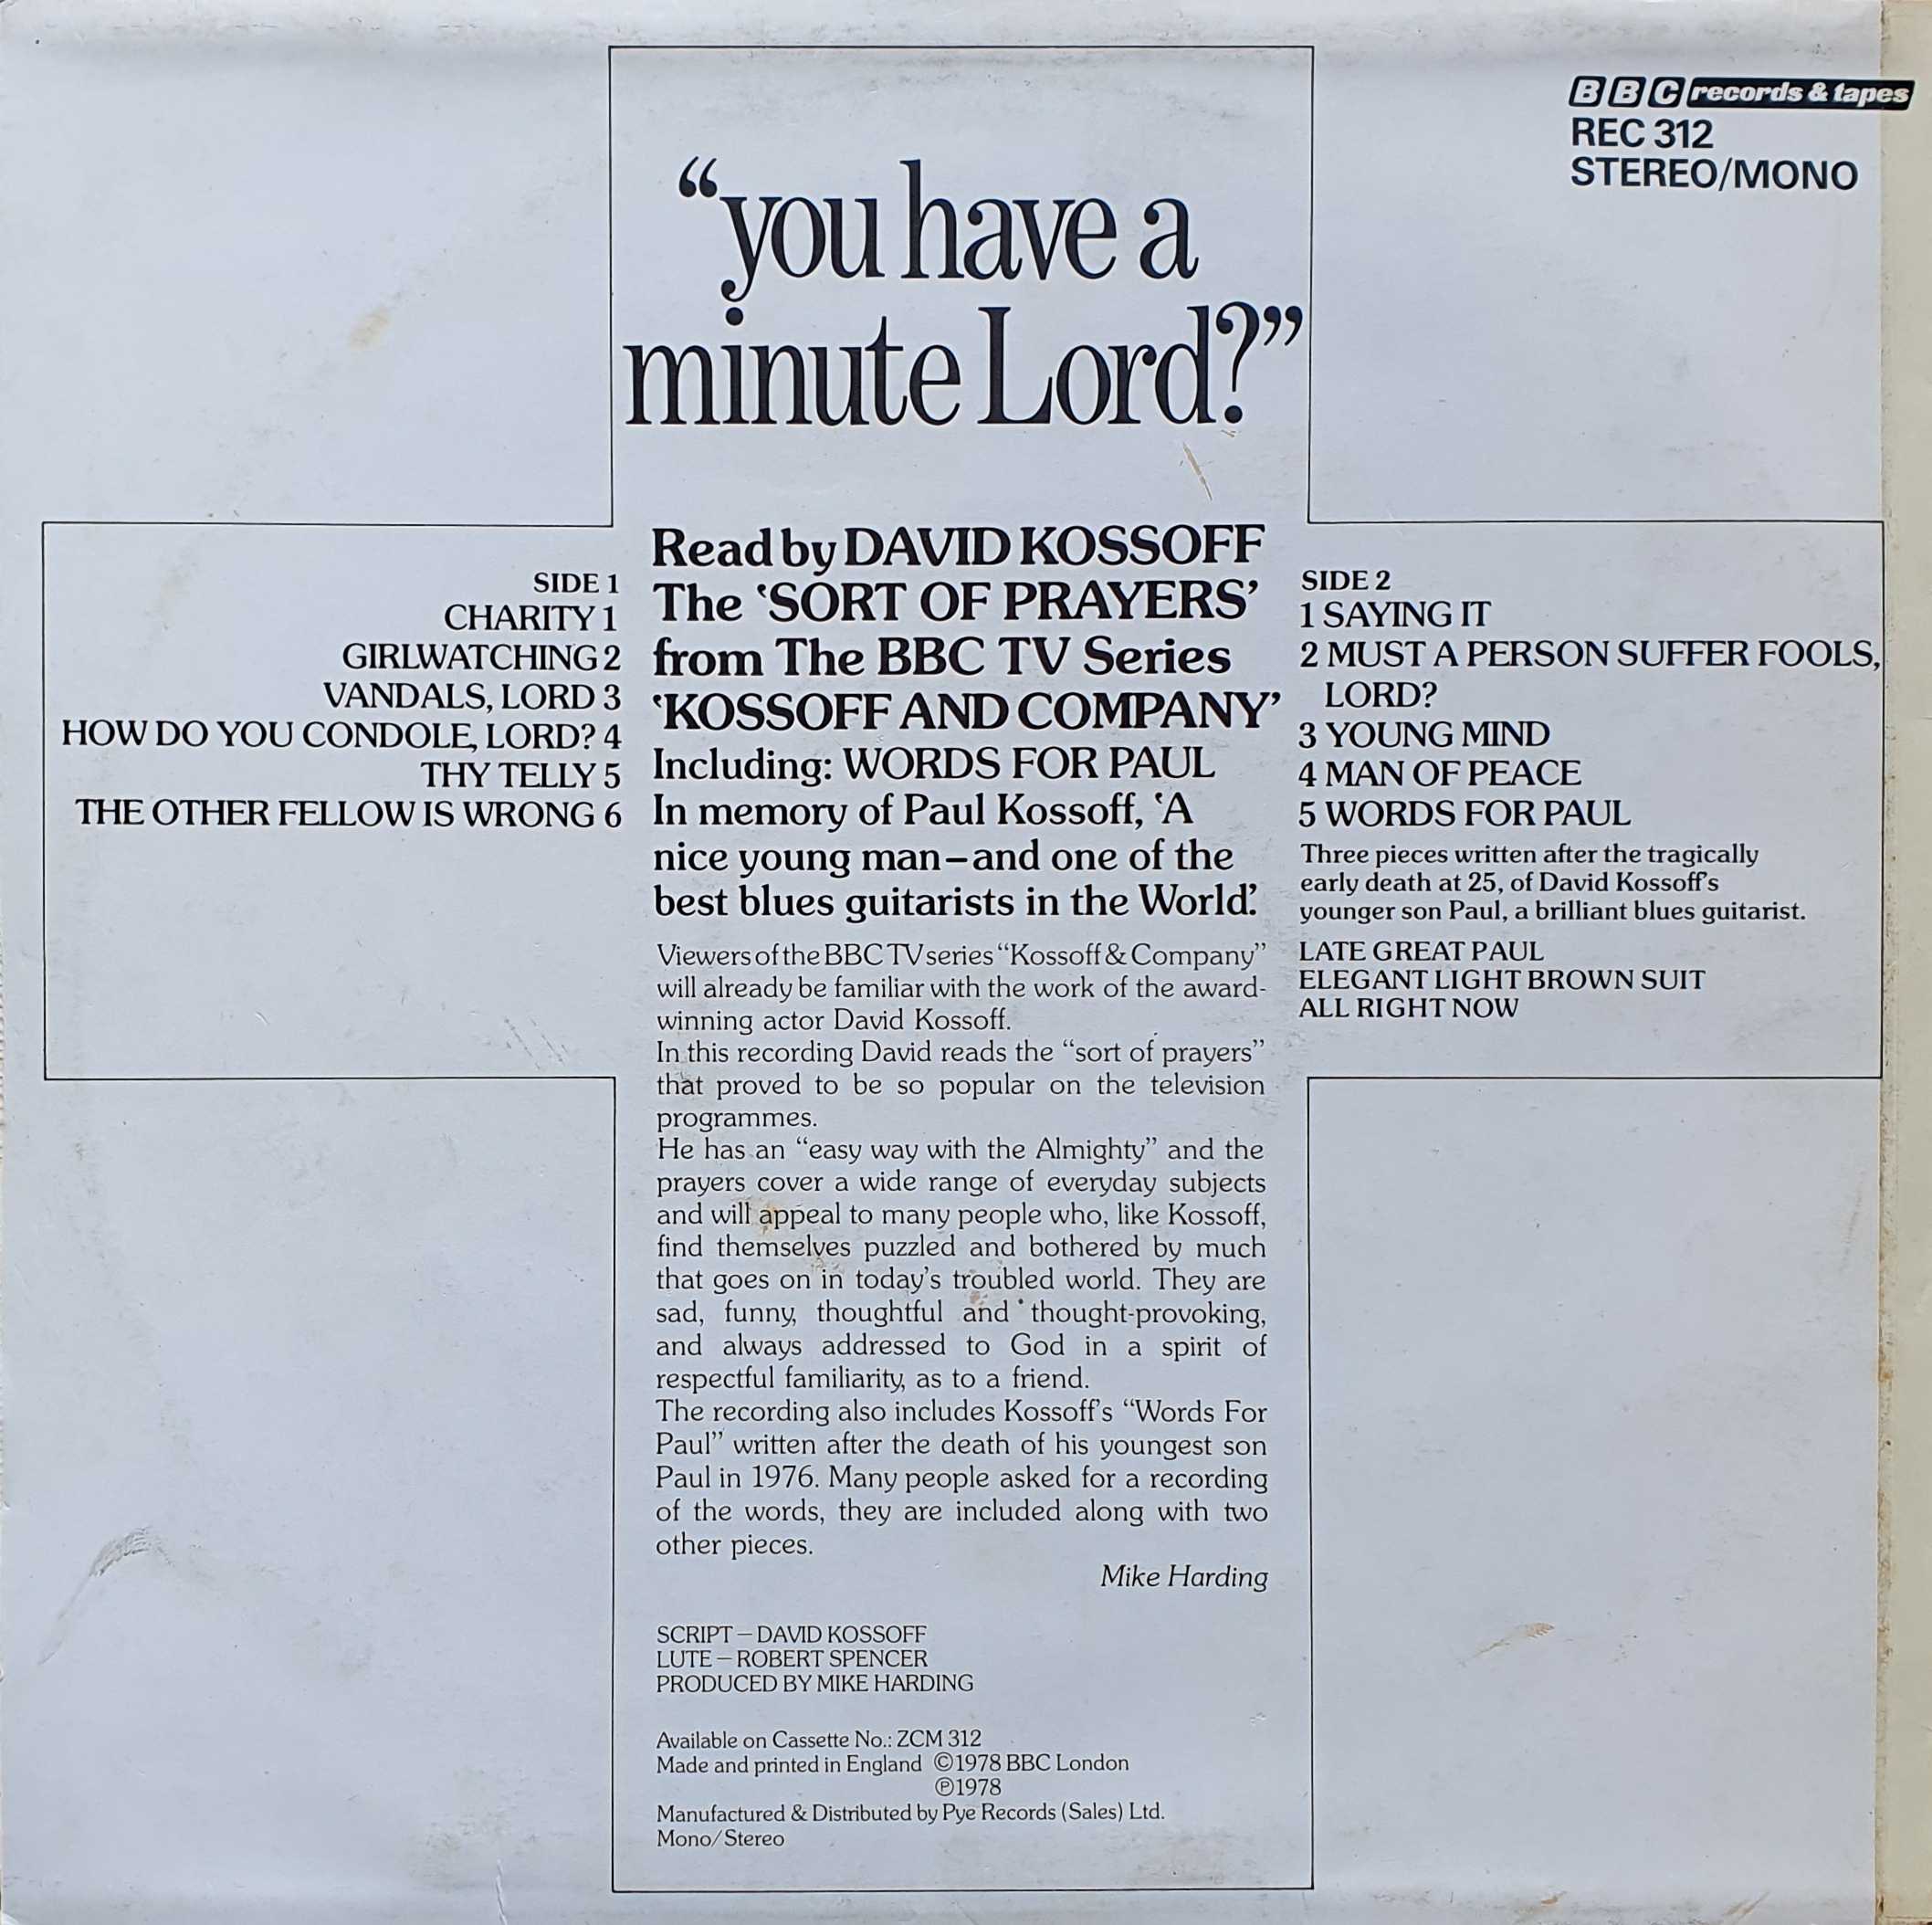 Picture of REC 312 You have a minute lord by artist David Kossoff from the BBC records and Tapes library